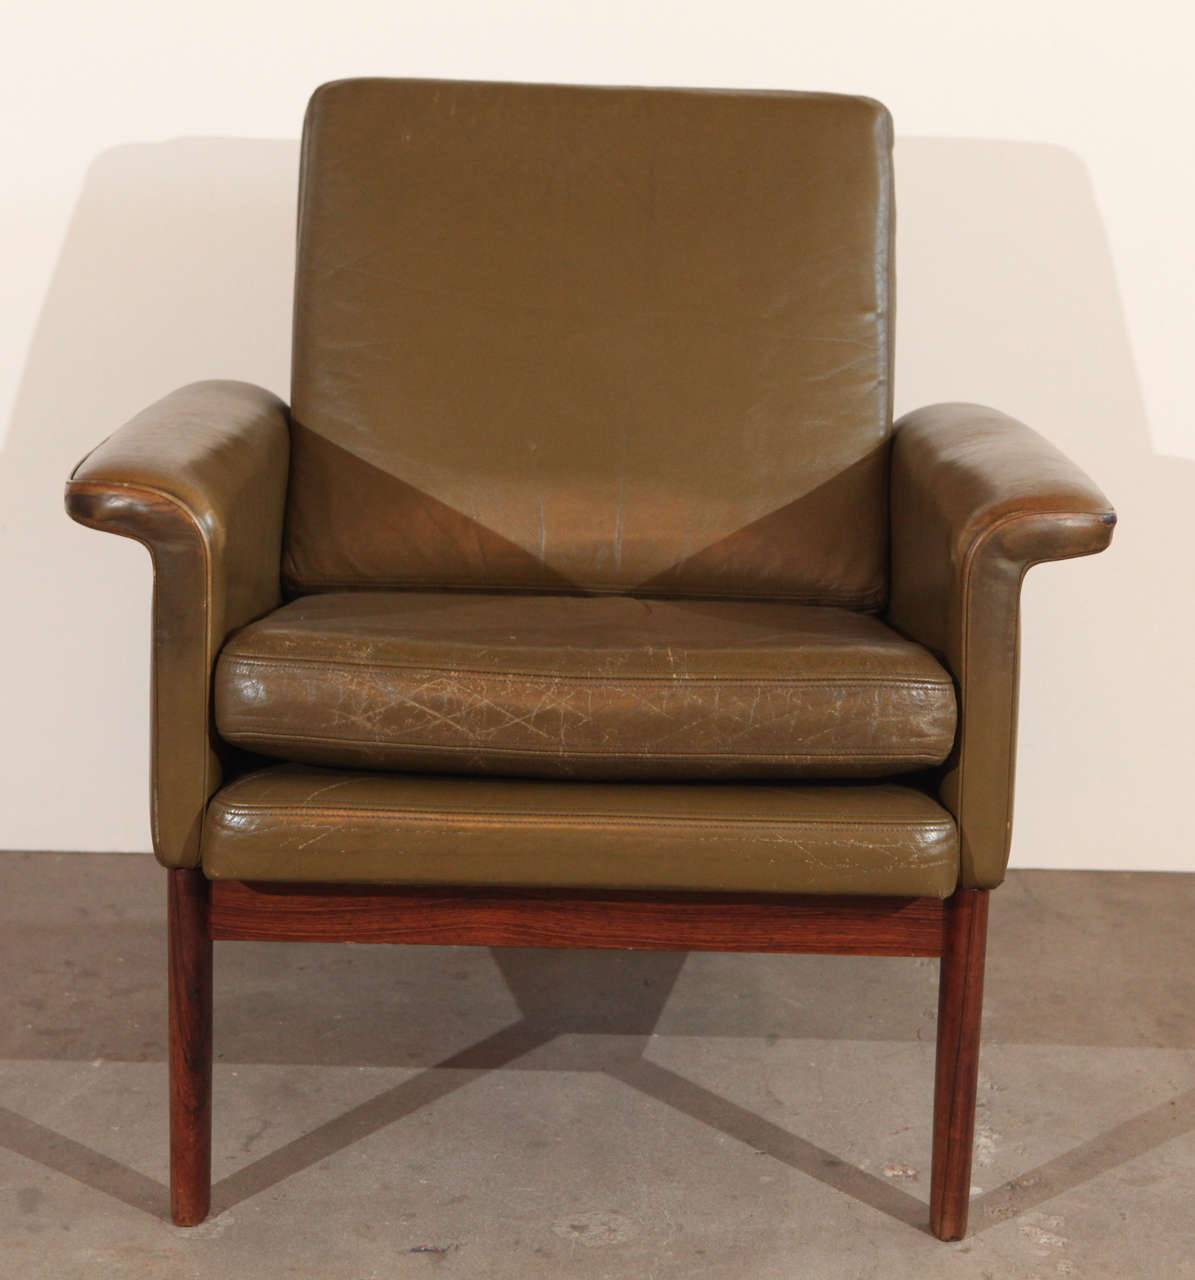 Pair of Finn Juhl armchairs in green leather. 1950's